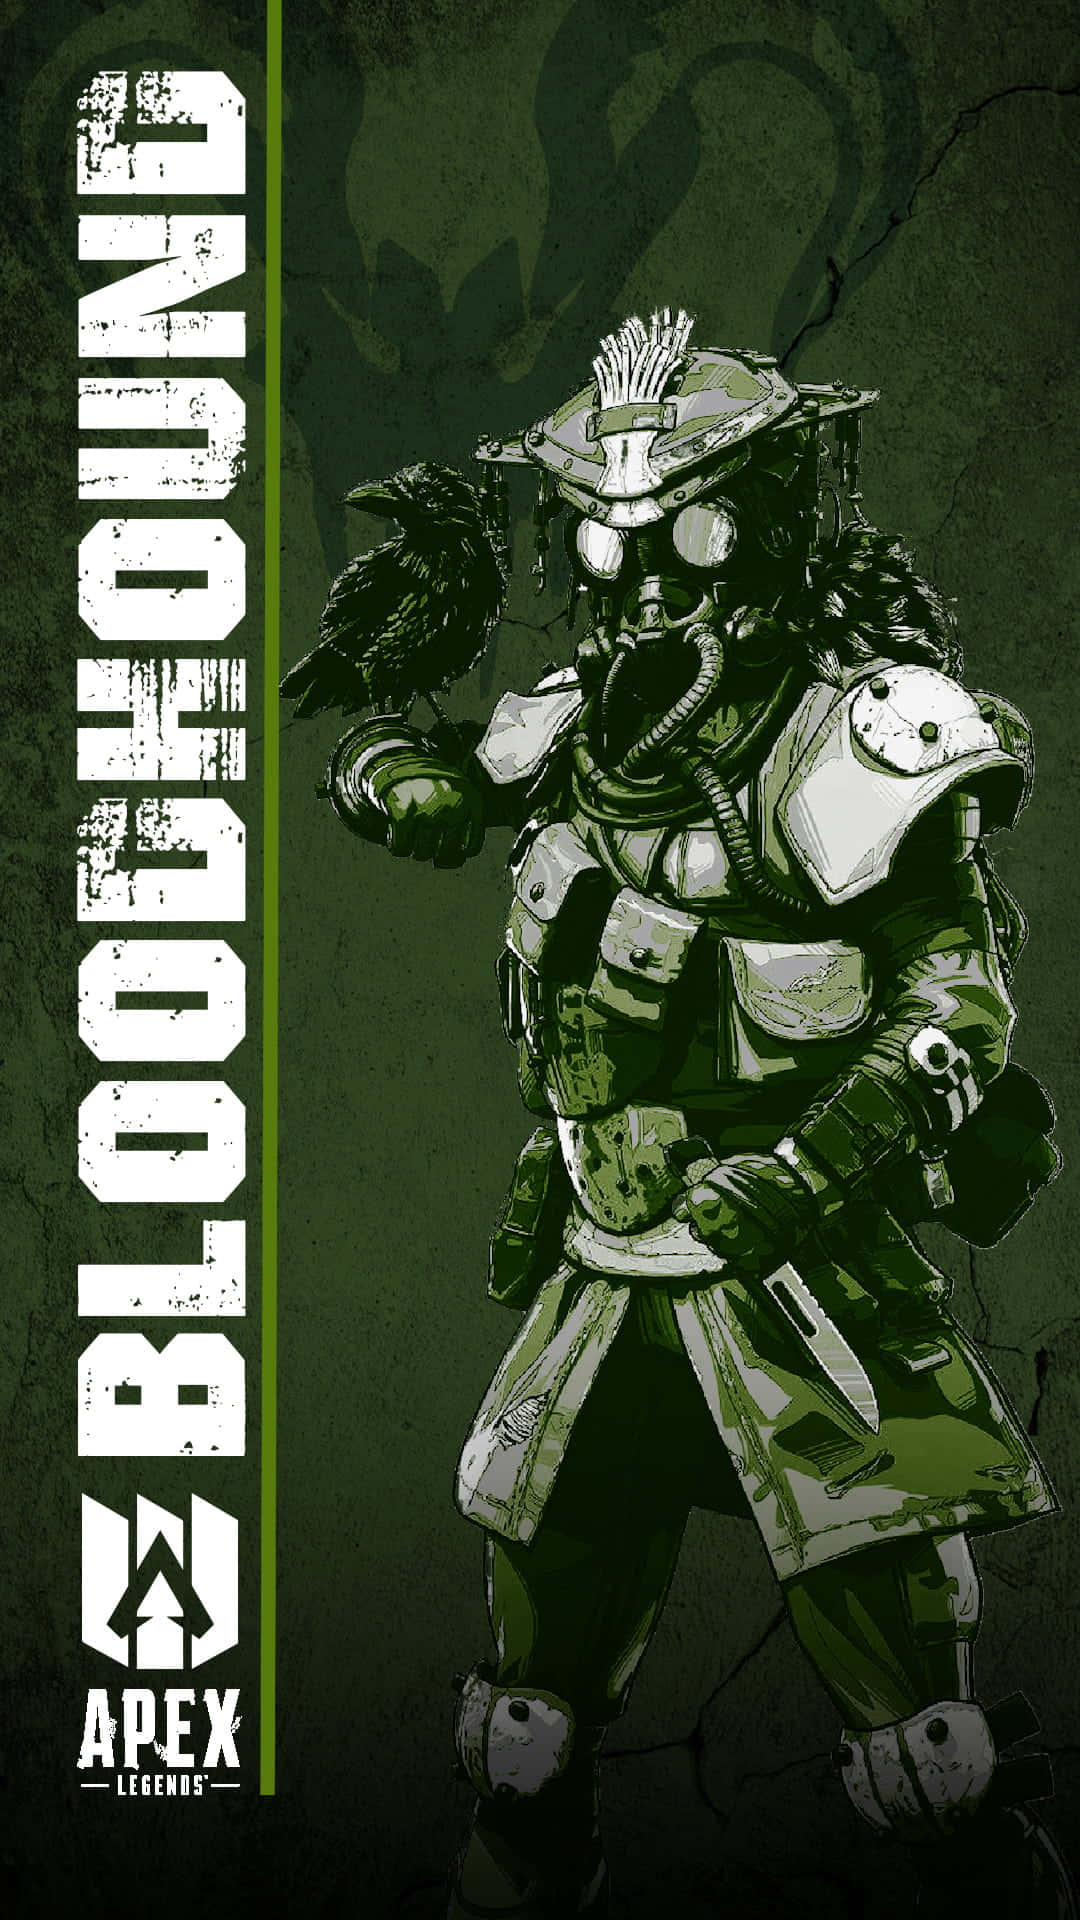 Adapt or be left Behind - Bloodhound of Apex Legends" Wallpaper